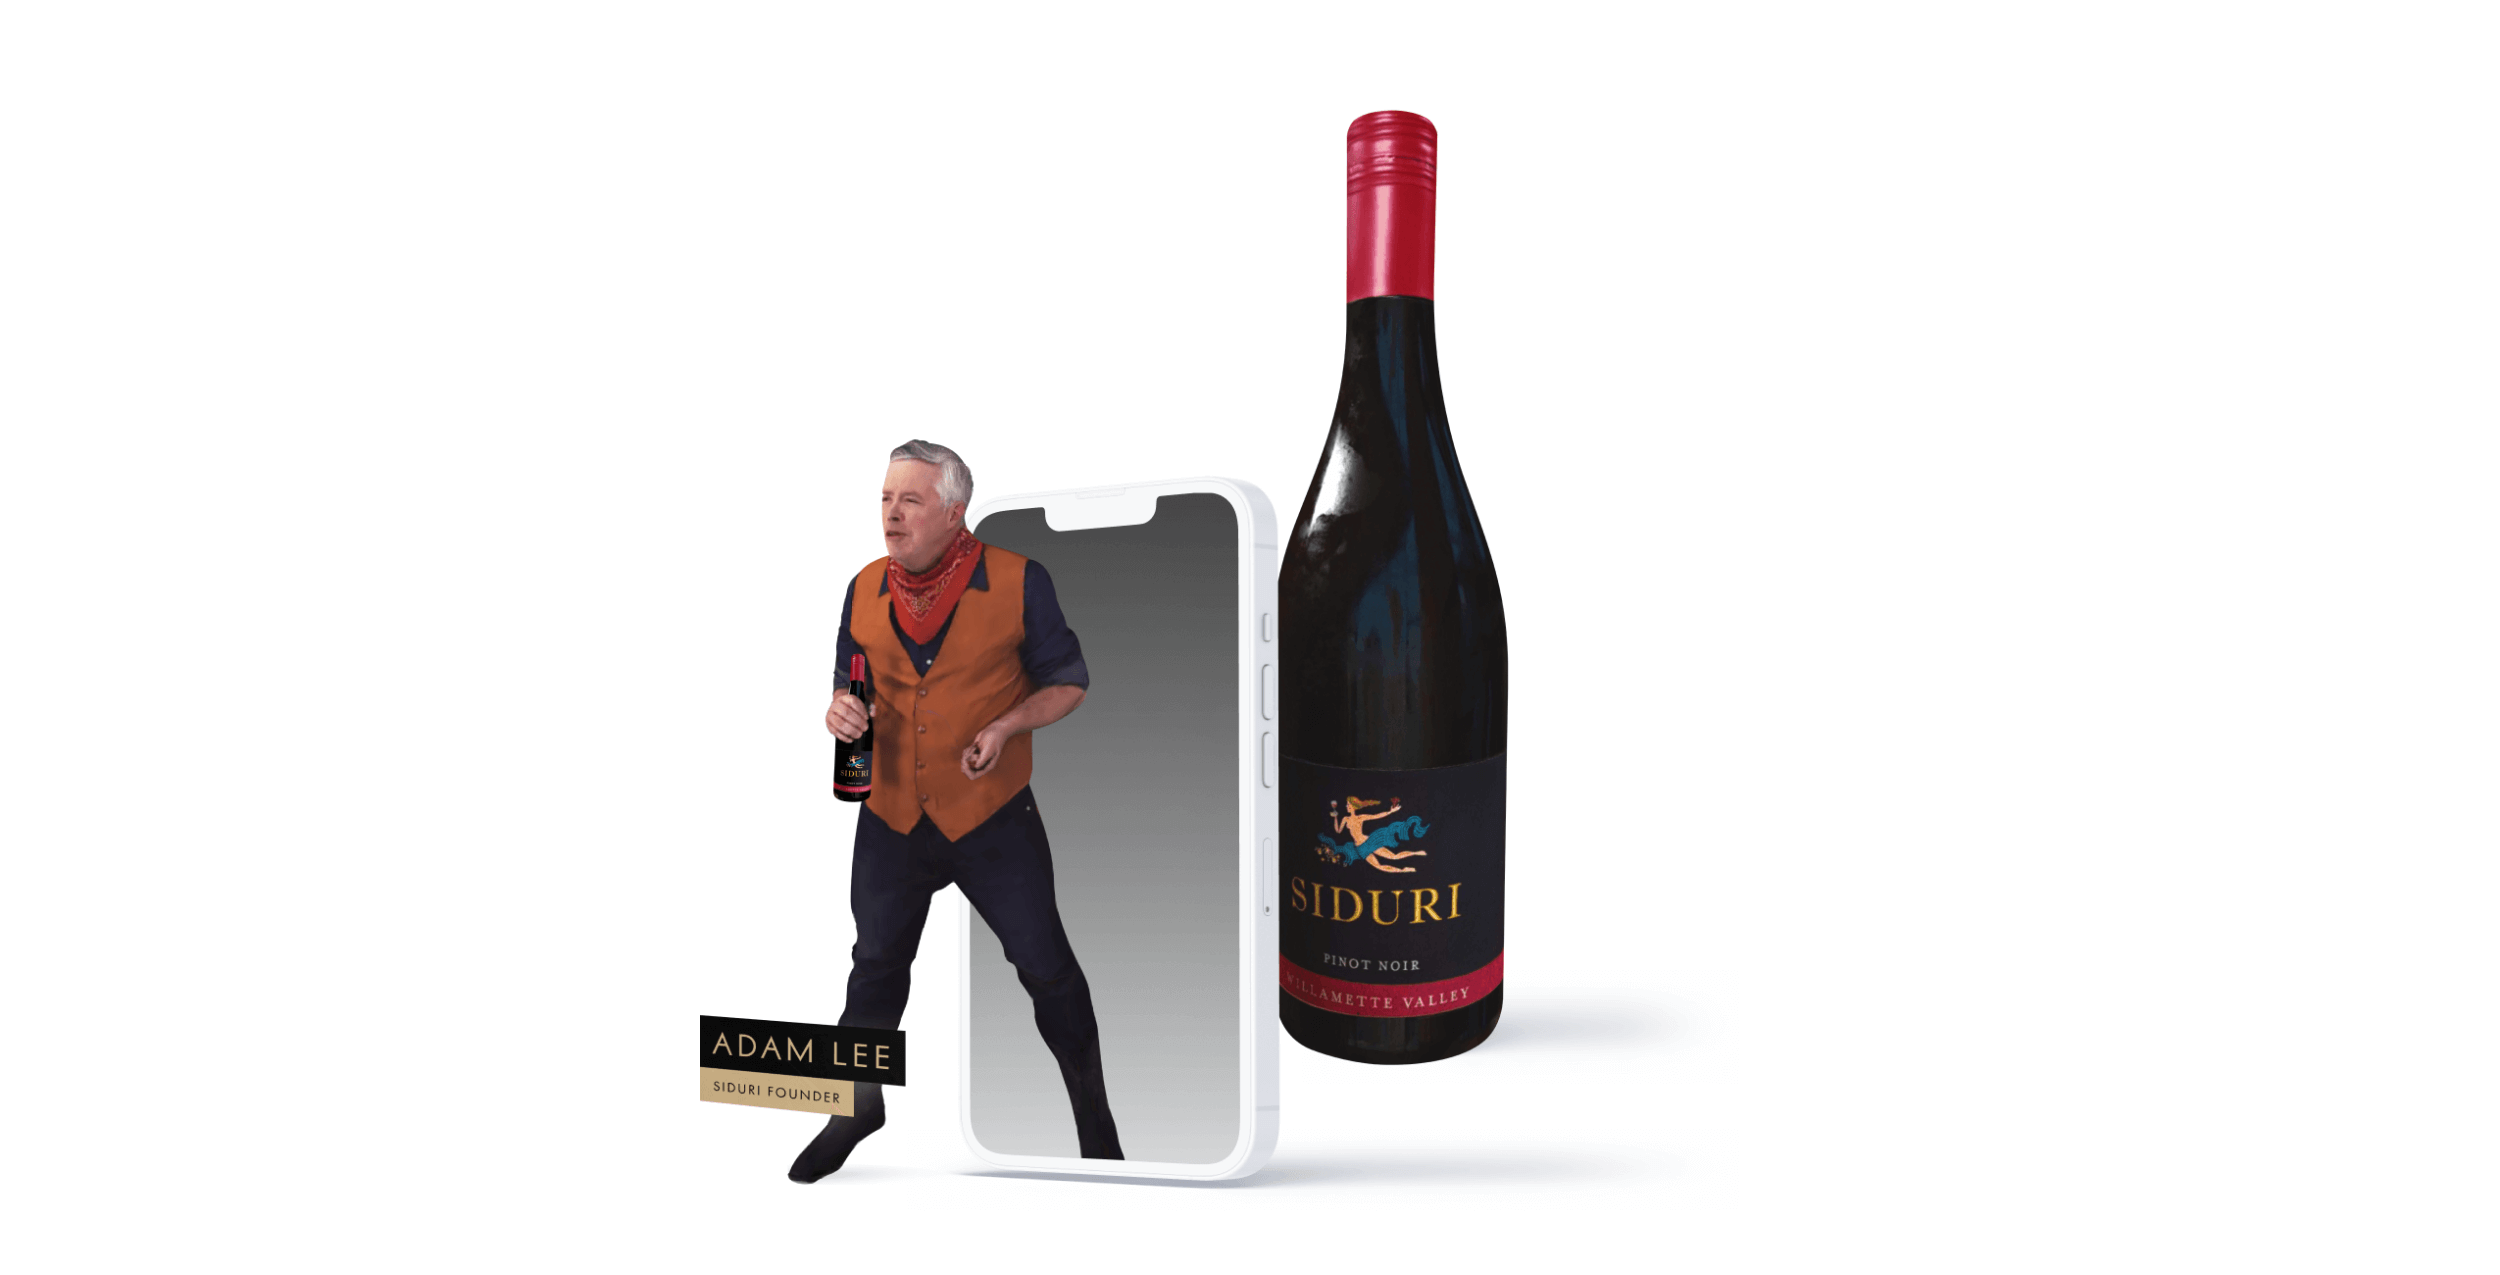 Jackson Family Wines - Siduri - Hero Image - Experience - AR - Augmented Reality - Owner - Player - Wine - Founder